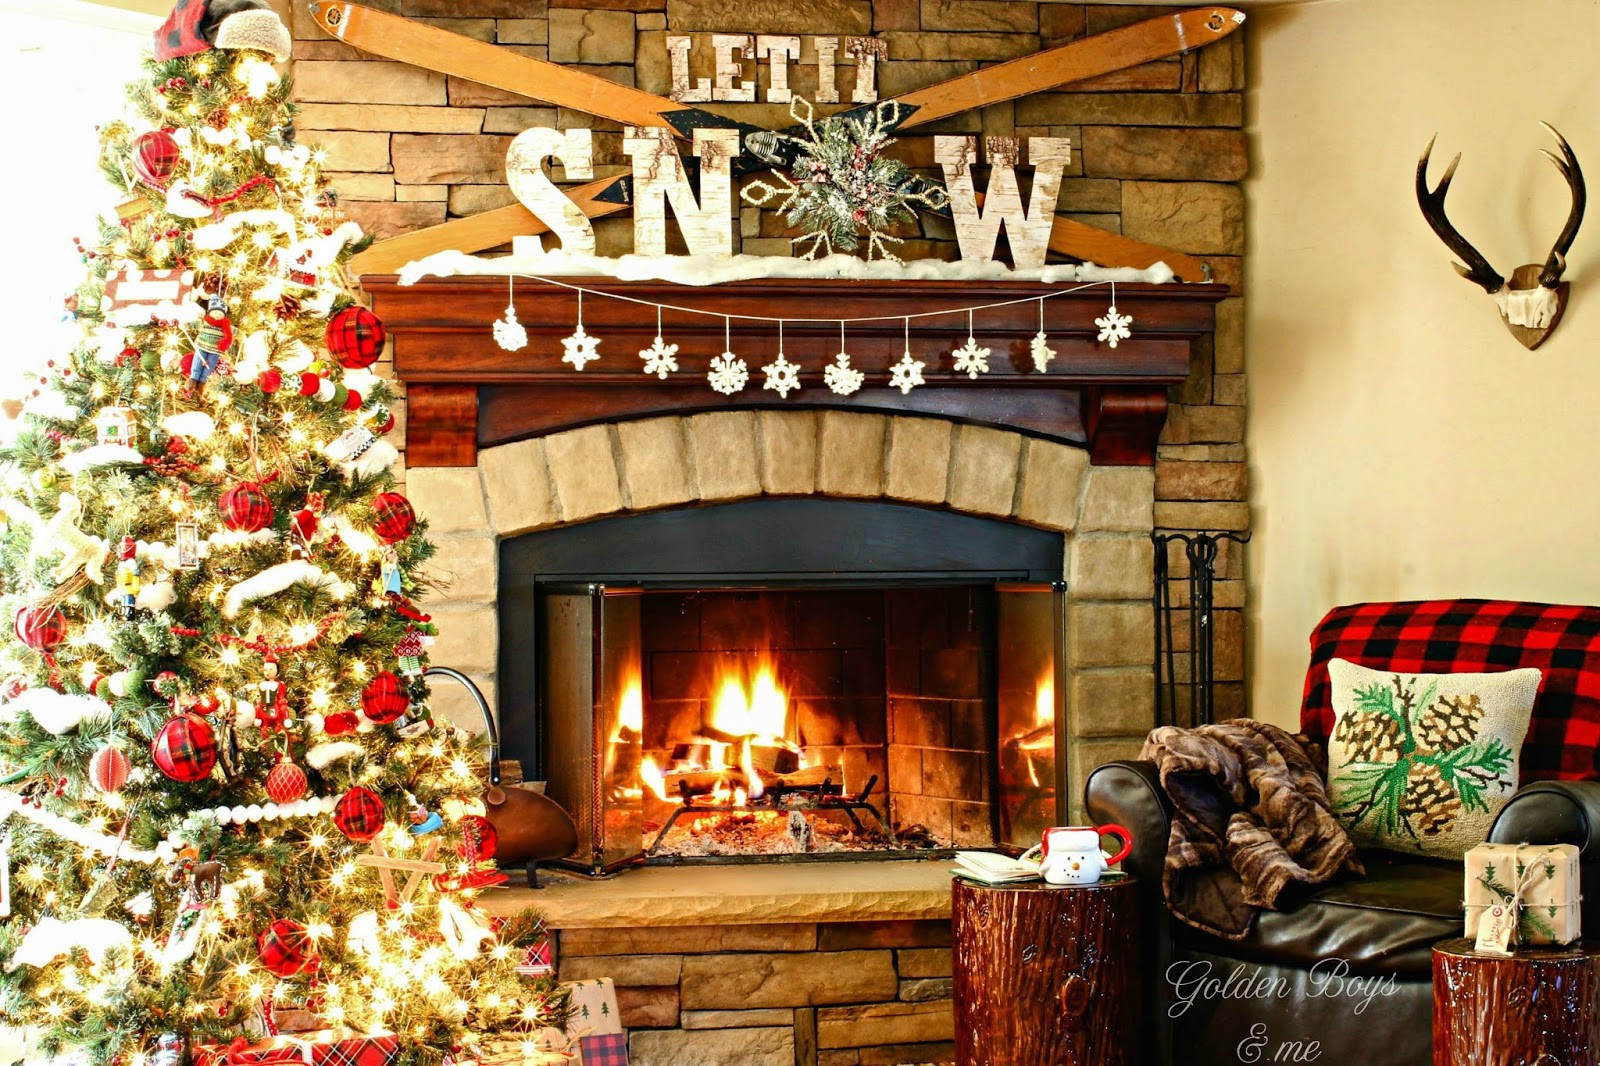 Cozy Christmas Fireplace
 Golden Boys and Me Holiday House Walk 2015